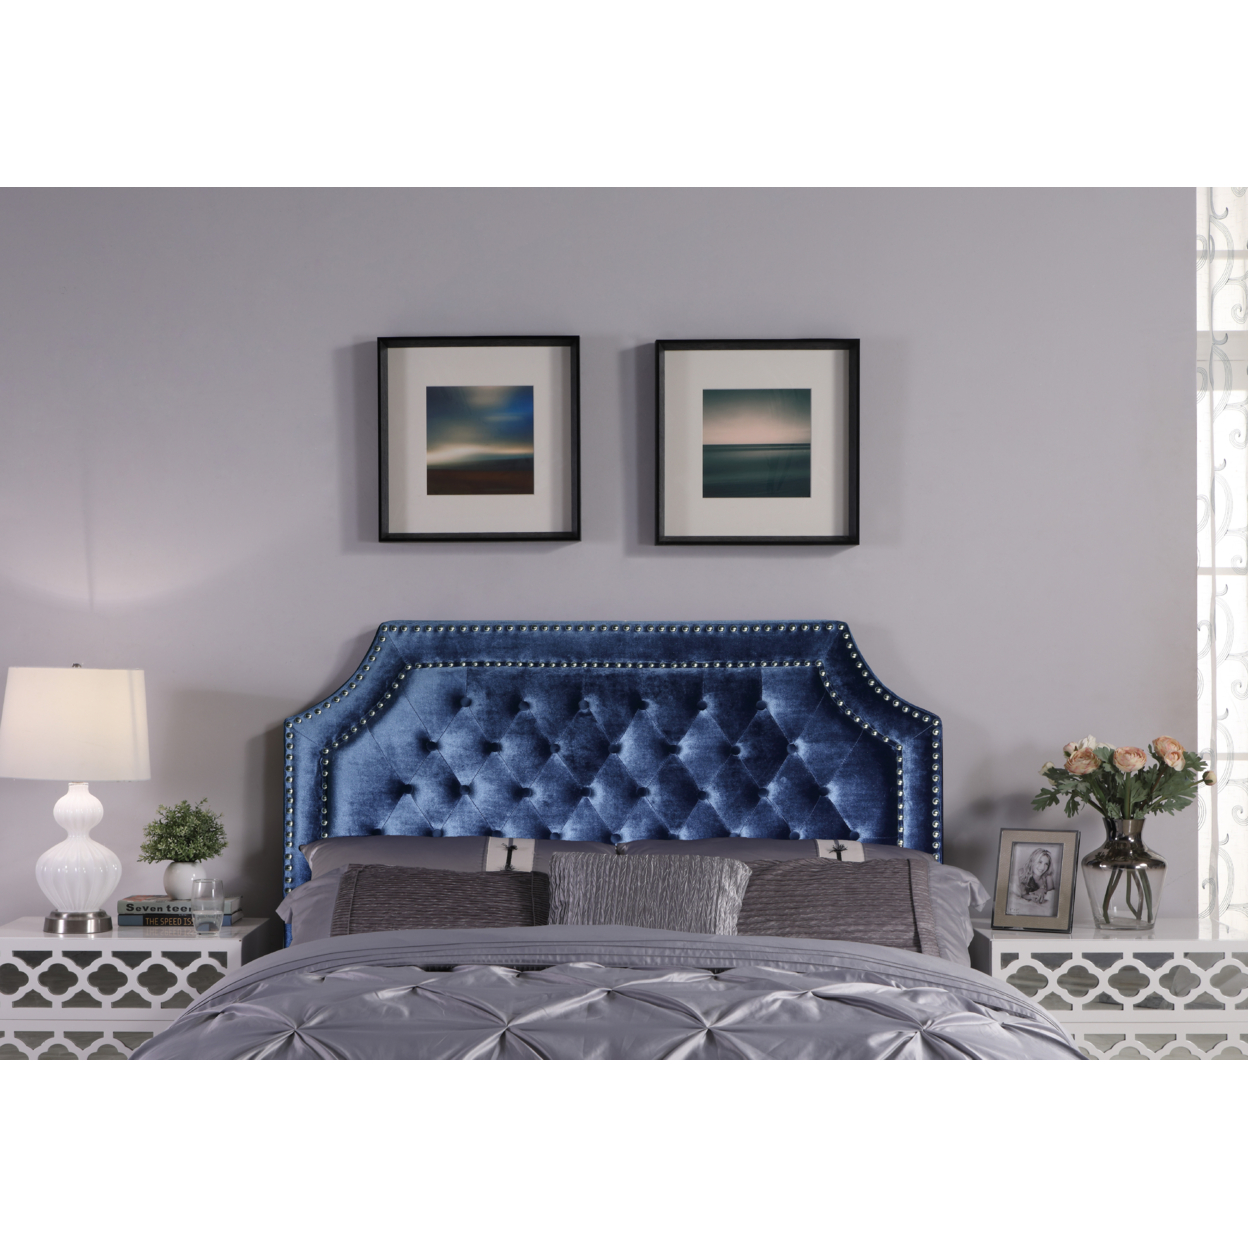 Horus Headboard Velvet Upholstered Button Tufted Double Row Silver Nailhead Trim - Taupe, Twin